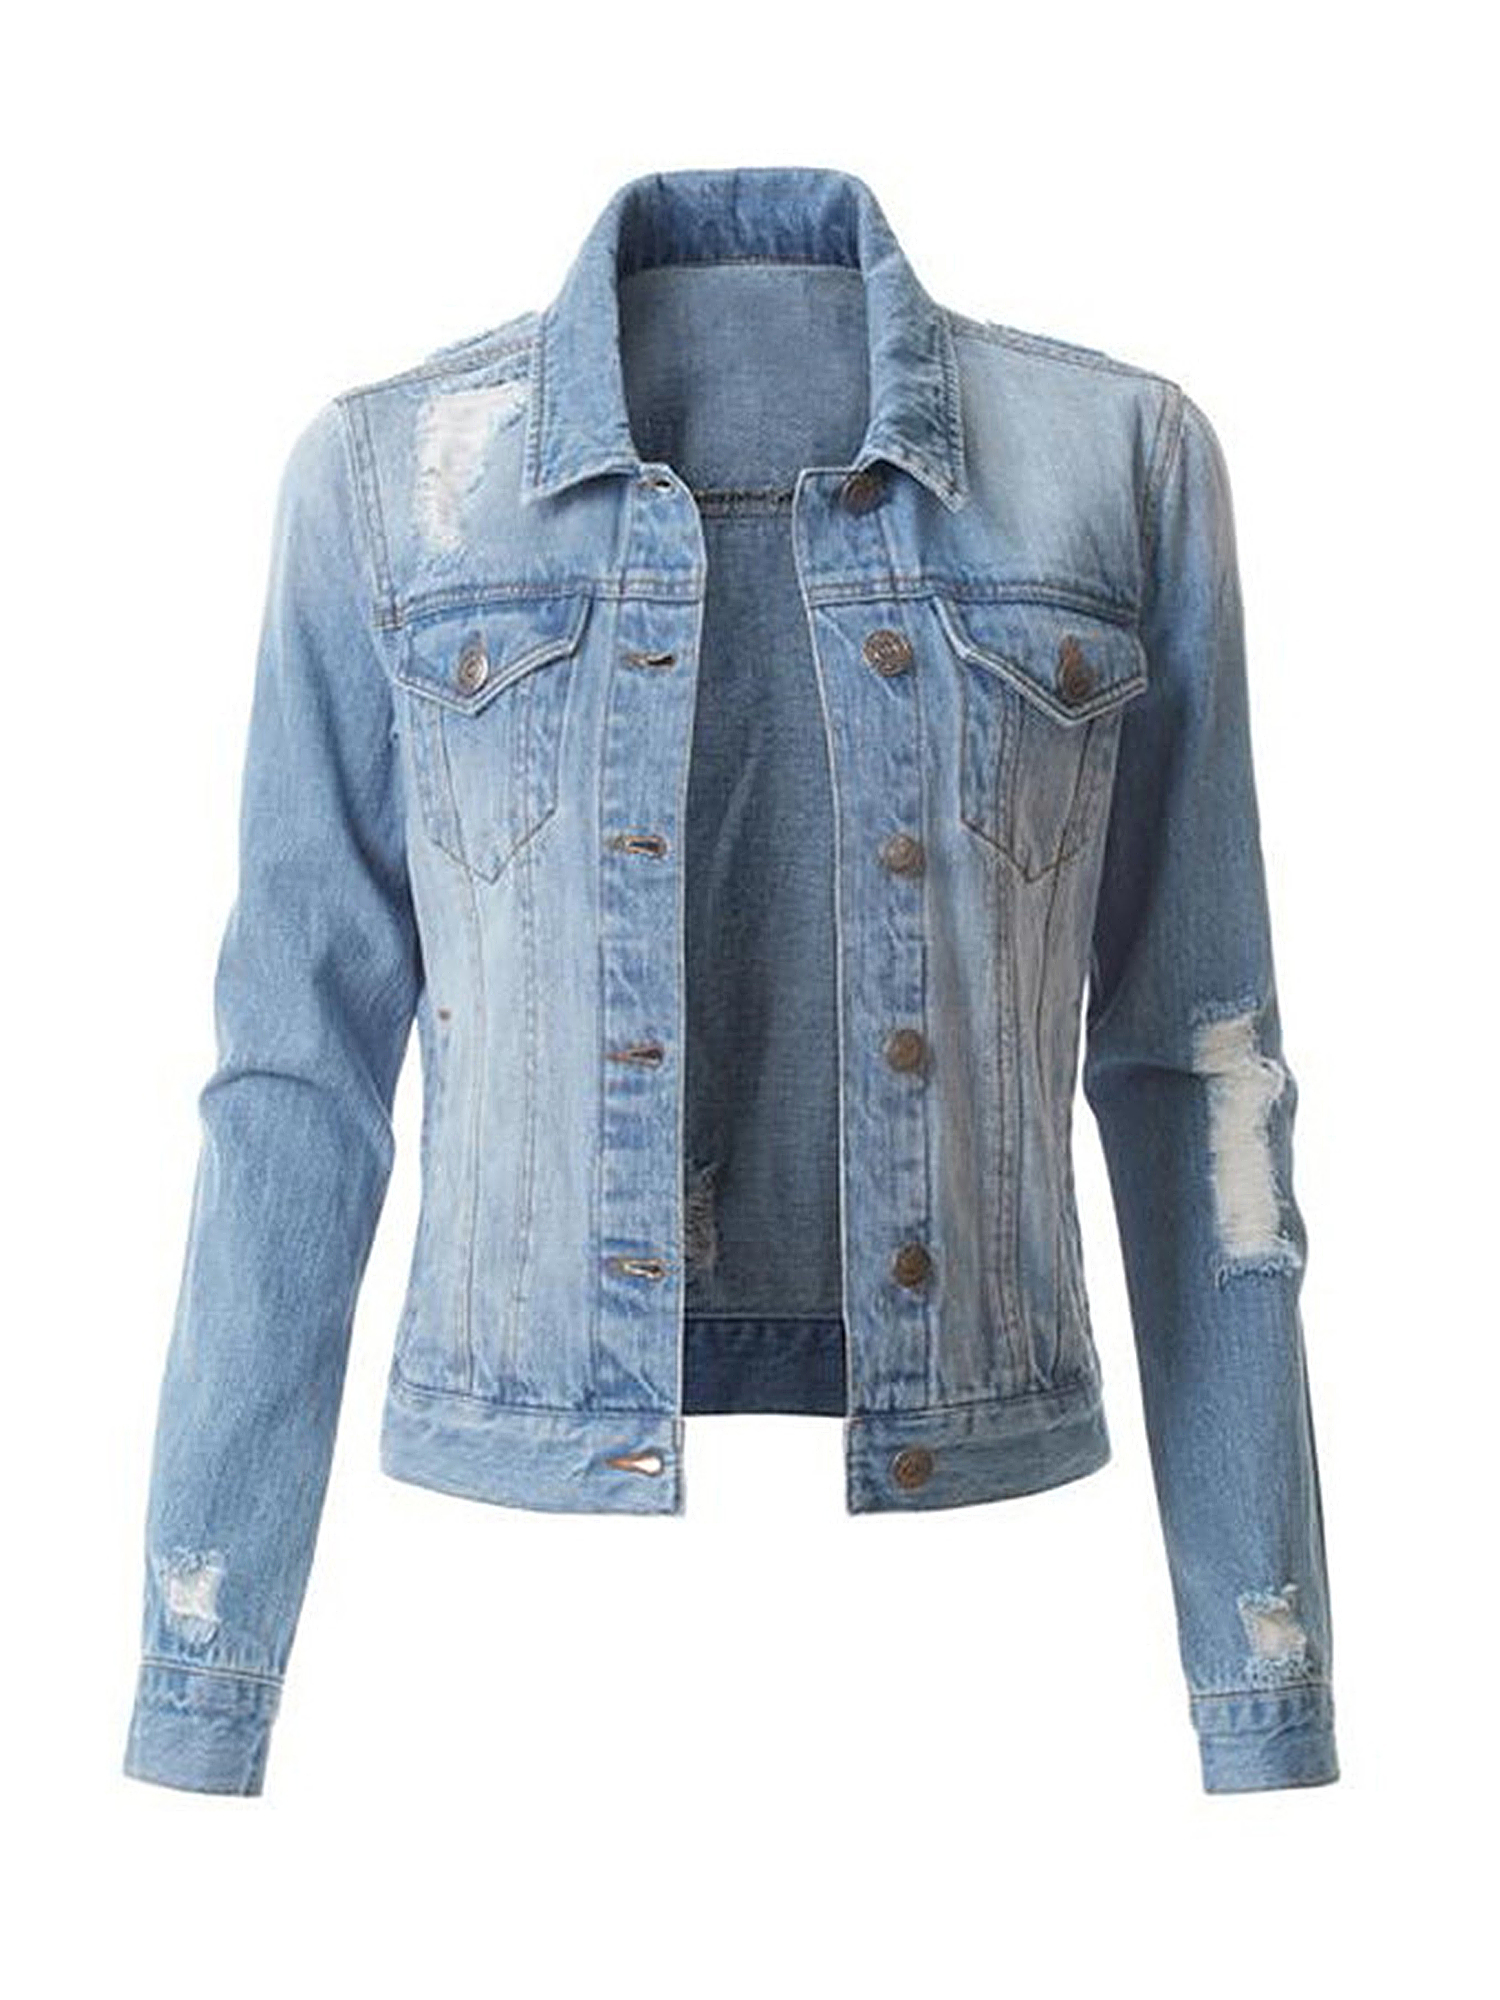 Denim Jackets For Women Long Sleeve Button Down Distressed Ripped Jeans Jacket Outwear Junior's Fashion Classic Denim Coat - image 1 of 2